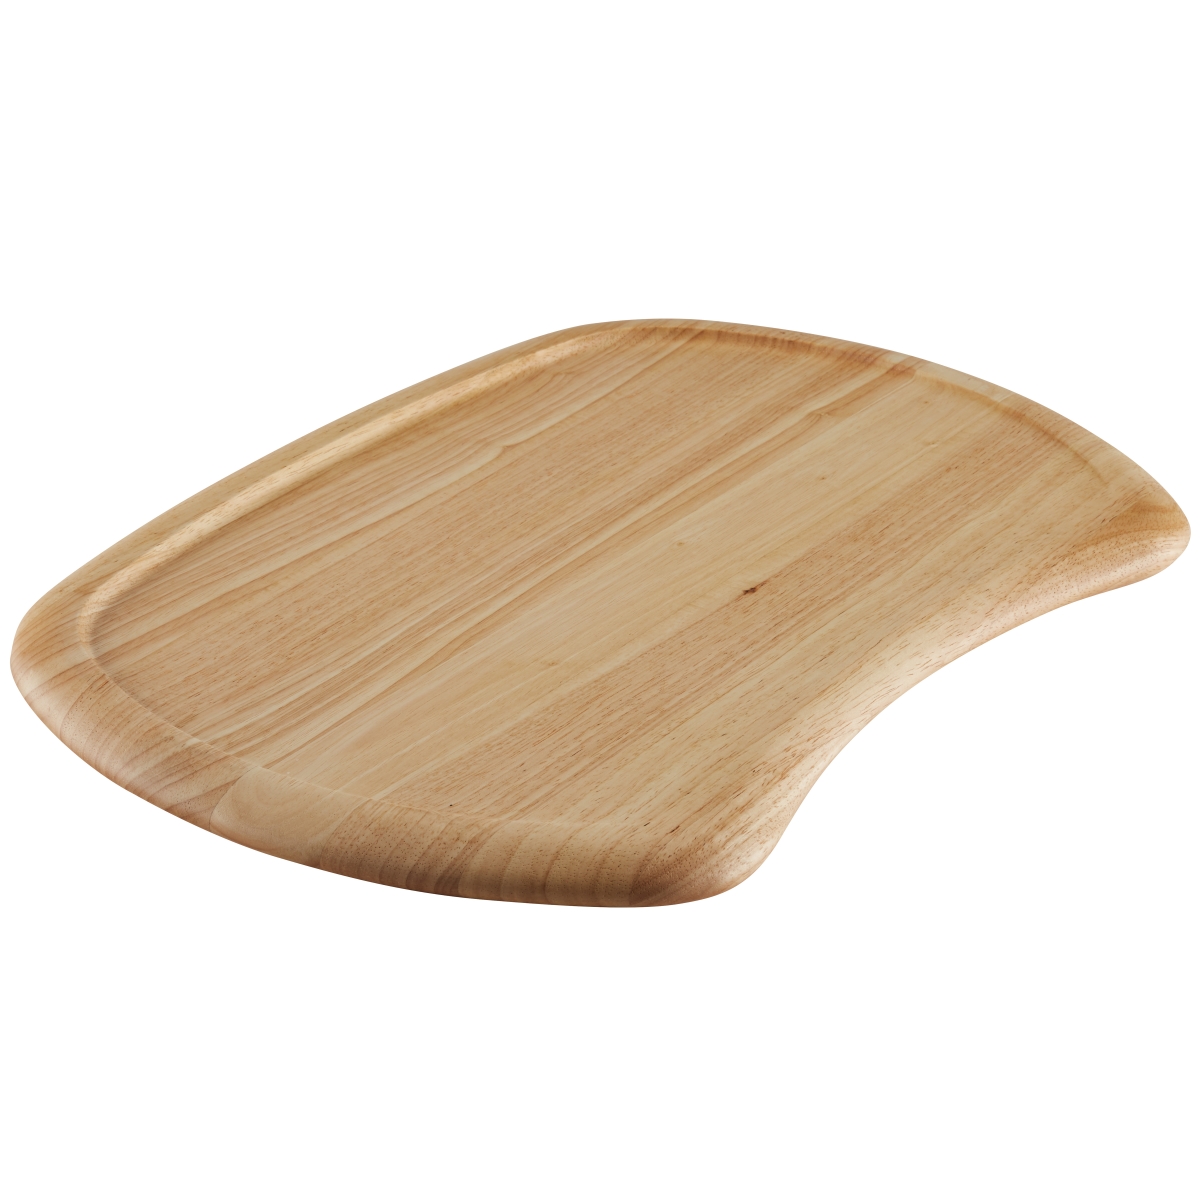 47007 Parawood Cut & Serve Board, 20 X 14 X 1 In.